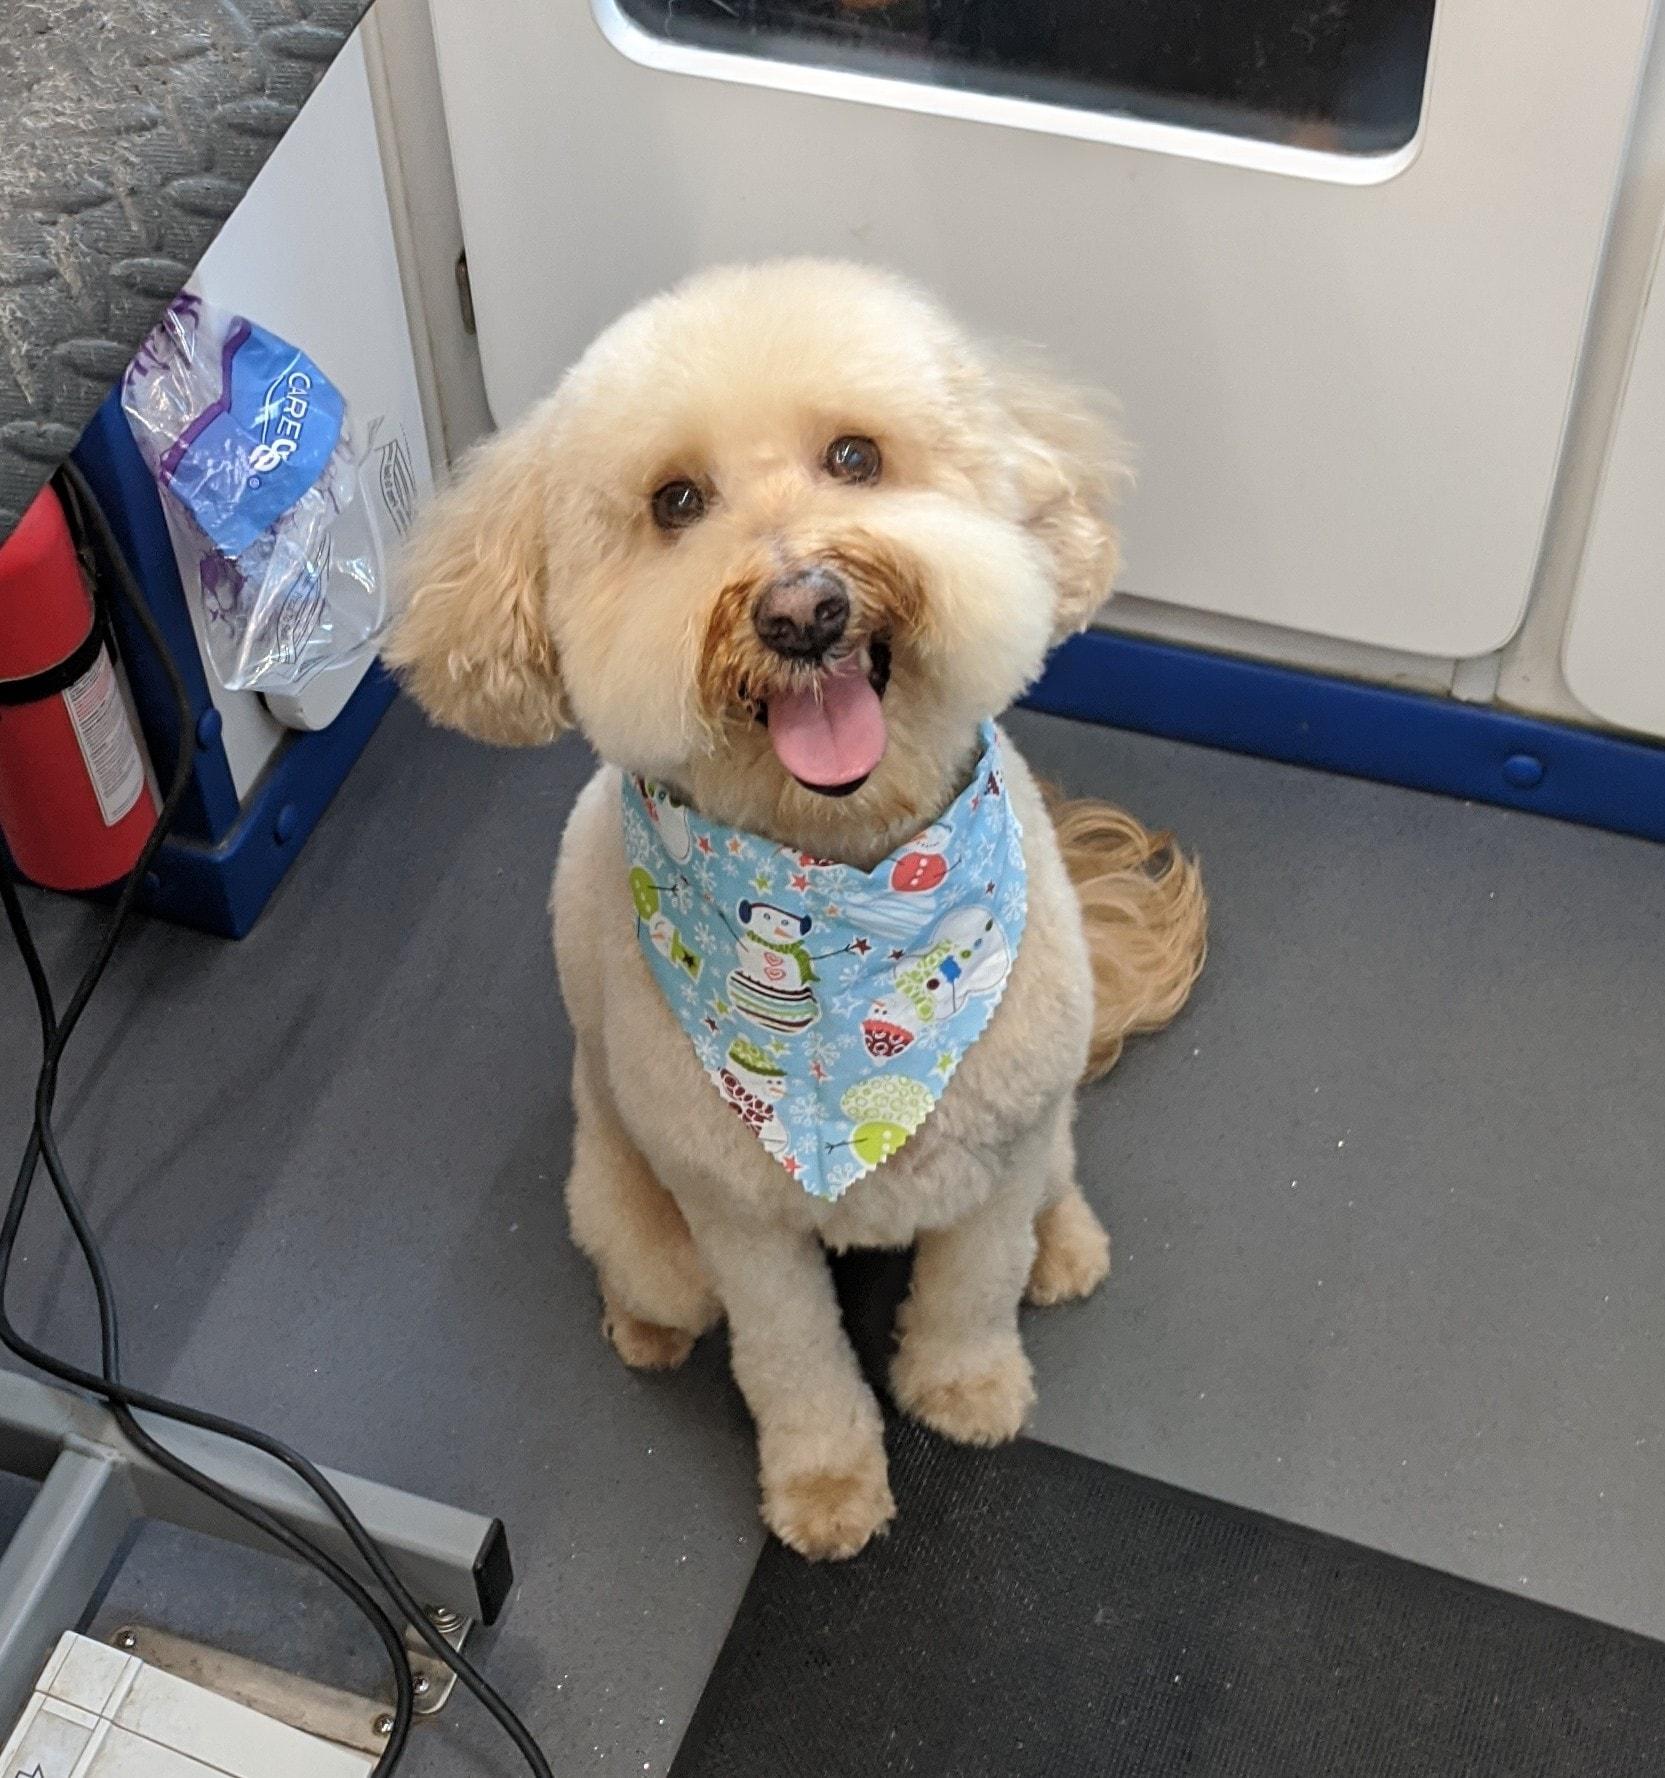 Pet Friendly The Pooch Waggin' Mobile Dog Grooming